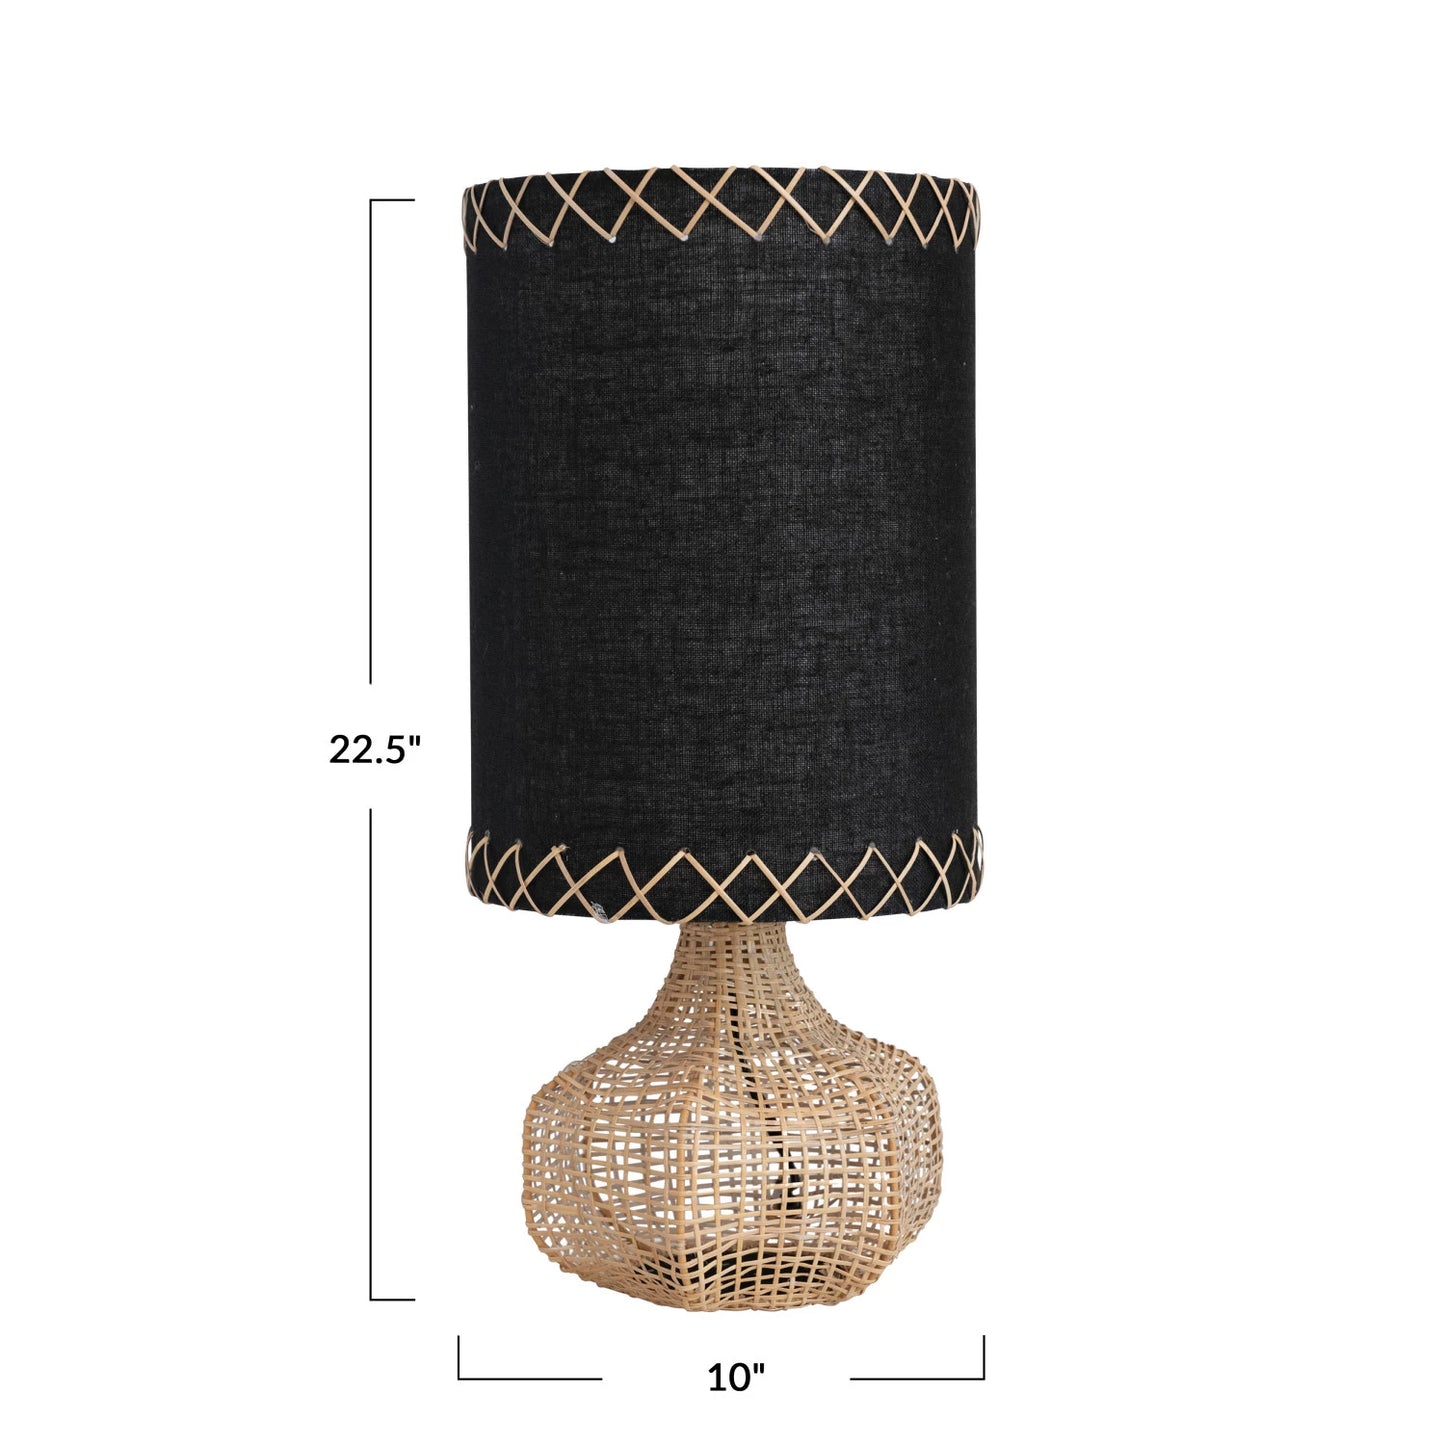 Woven Cane Lamp w/ Stitched Linen Shade